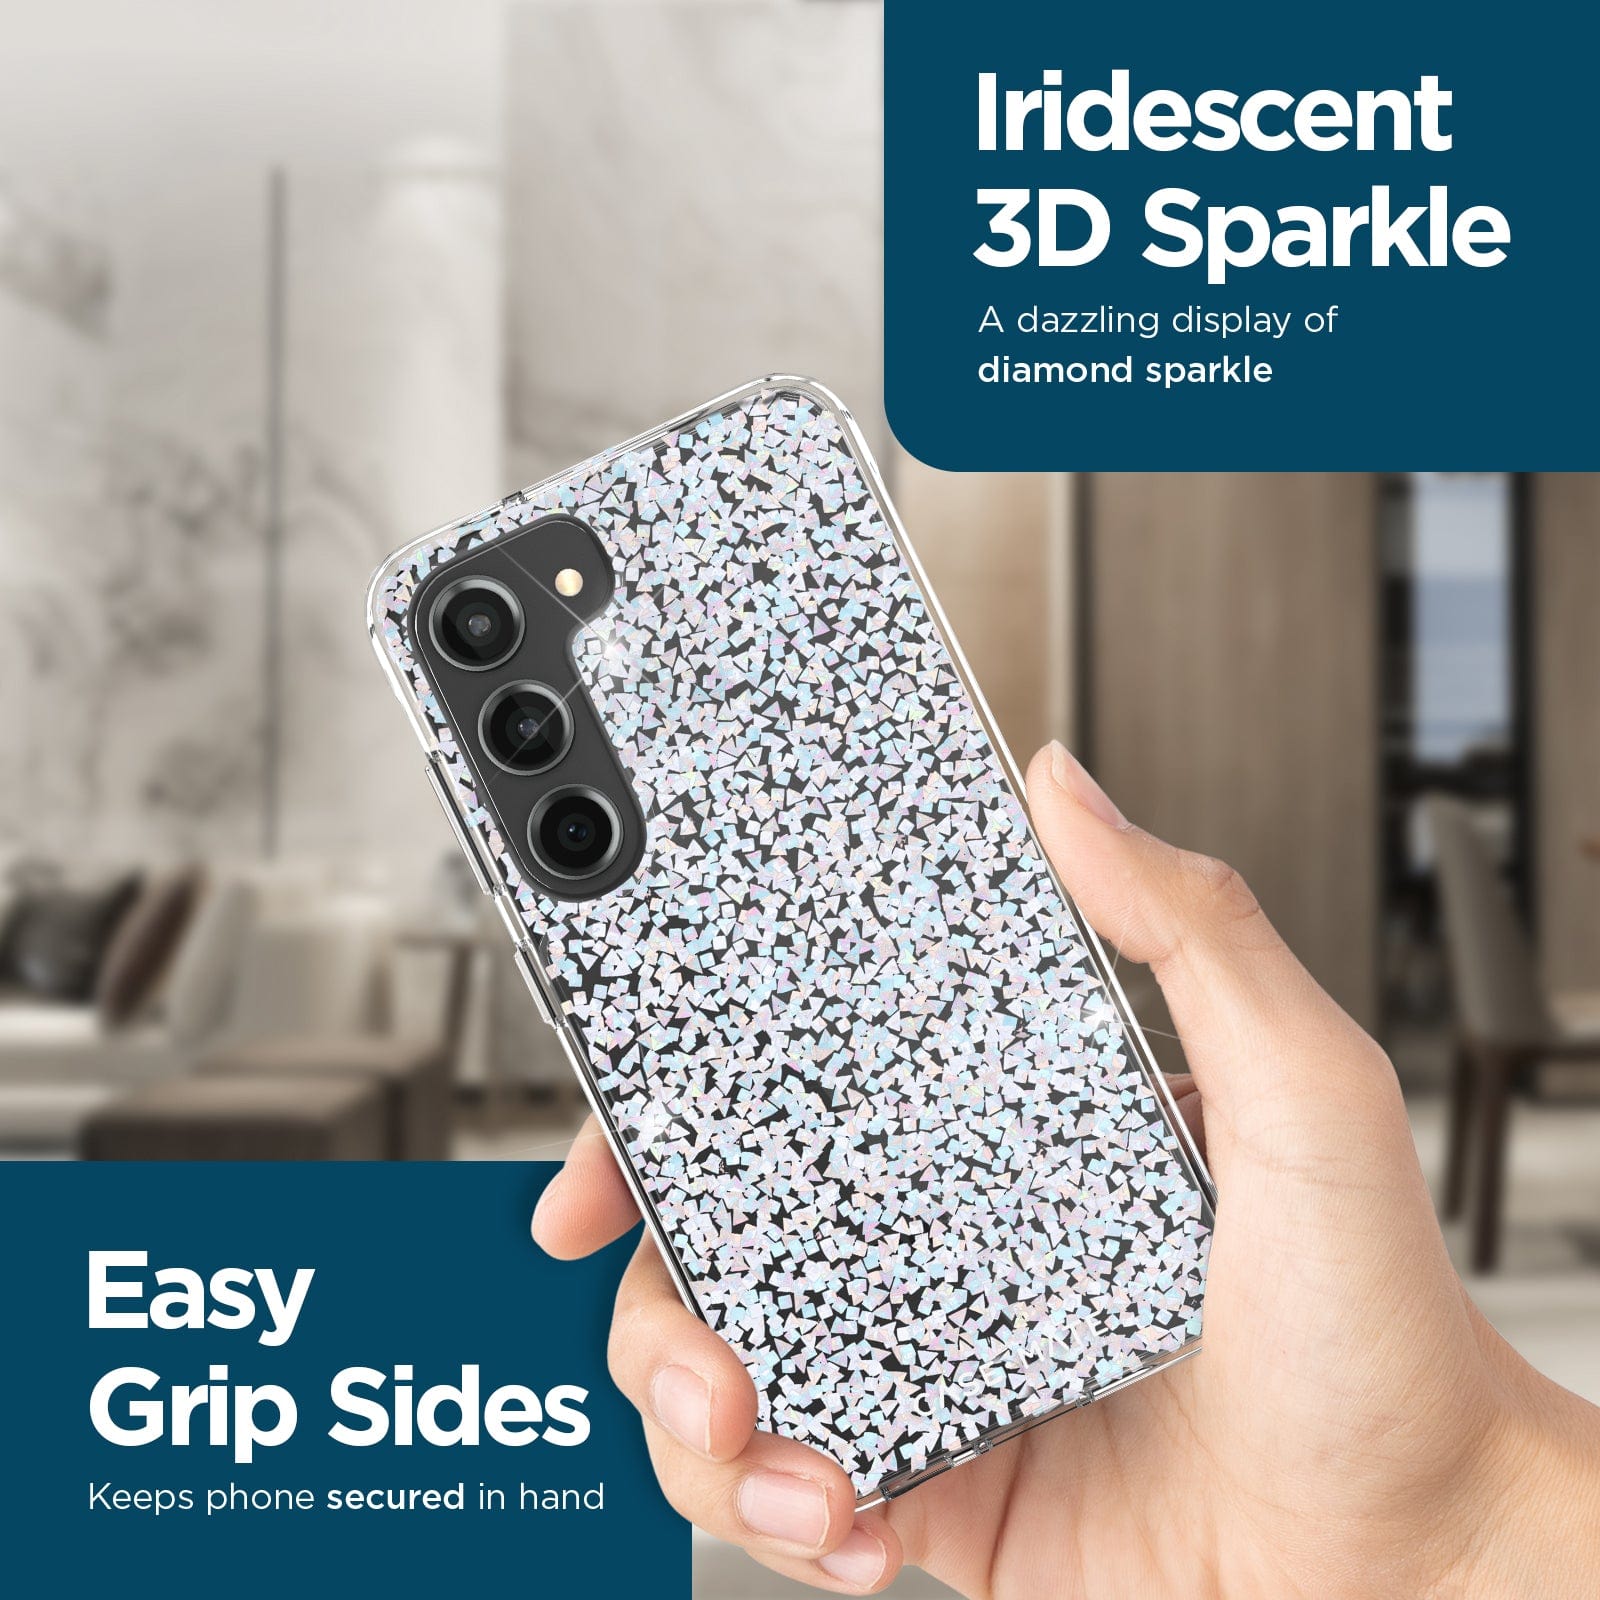 IRIDESCENT 3D SPARKLE. A DAZZLING DISPLAY OF DIAMOND SPARKLE. EASY GRIP SIDES. KEEPS PHONE SECURED IN HAND.